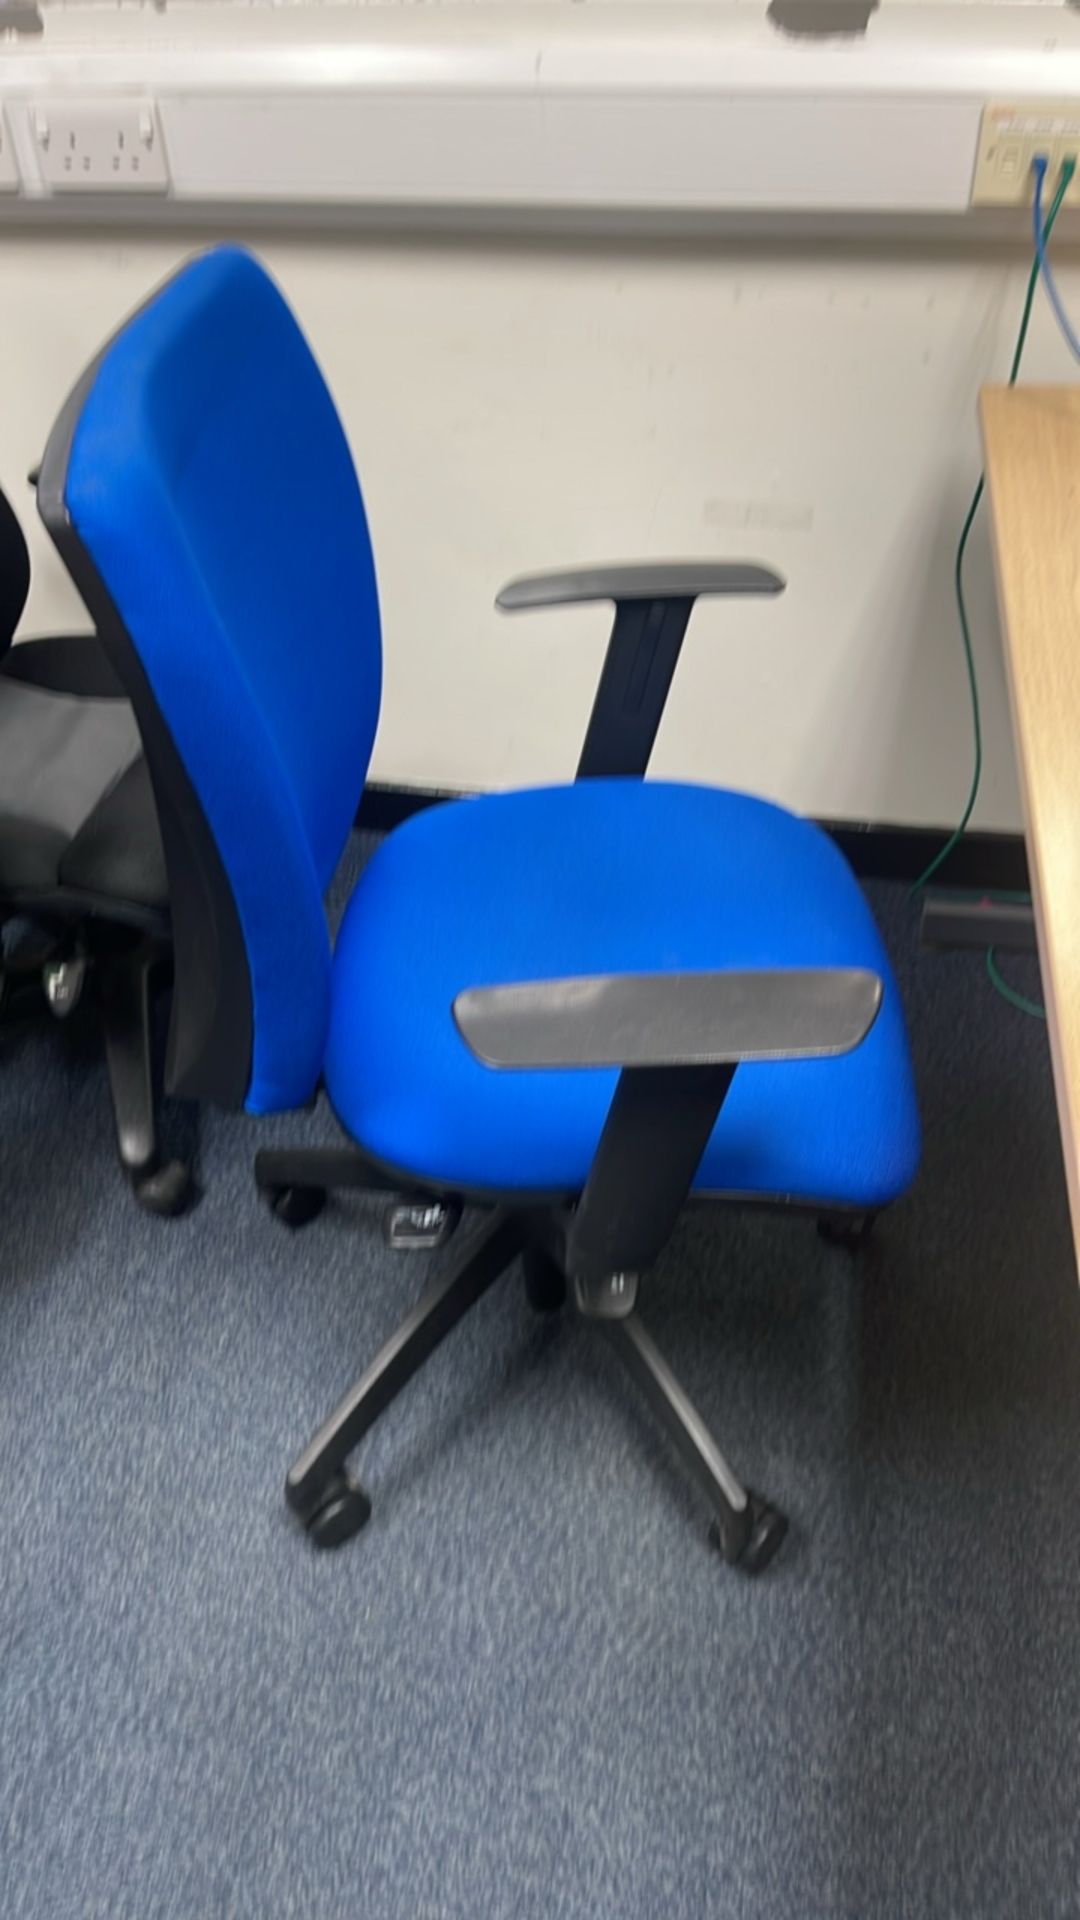 Pair Of Office Desks, Chairs - Image 7 of 7